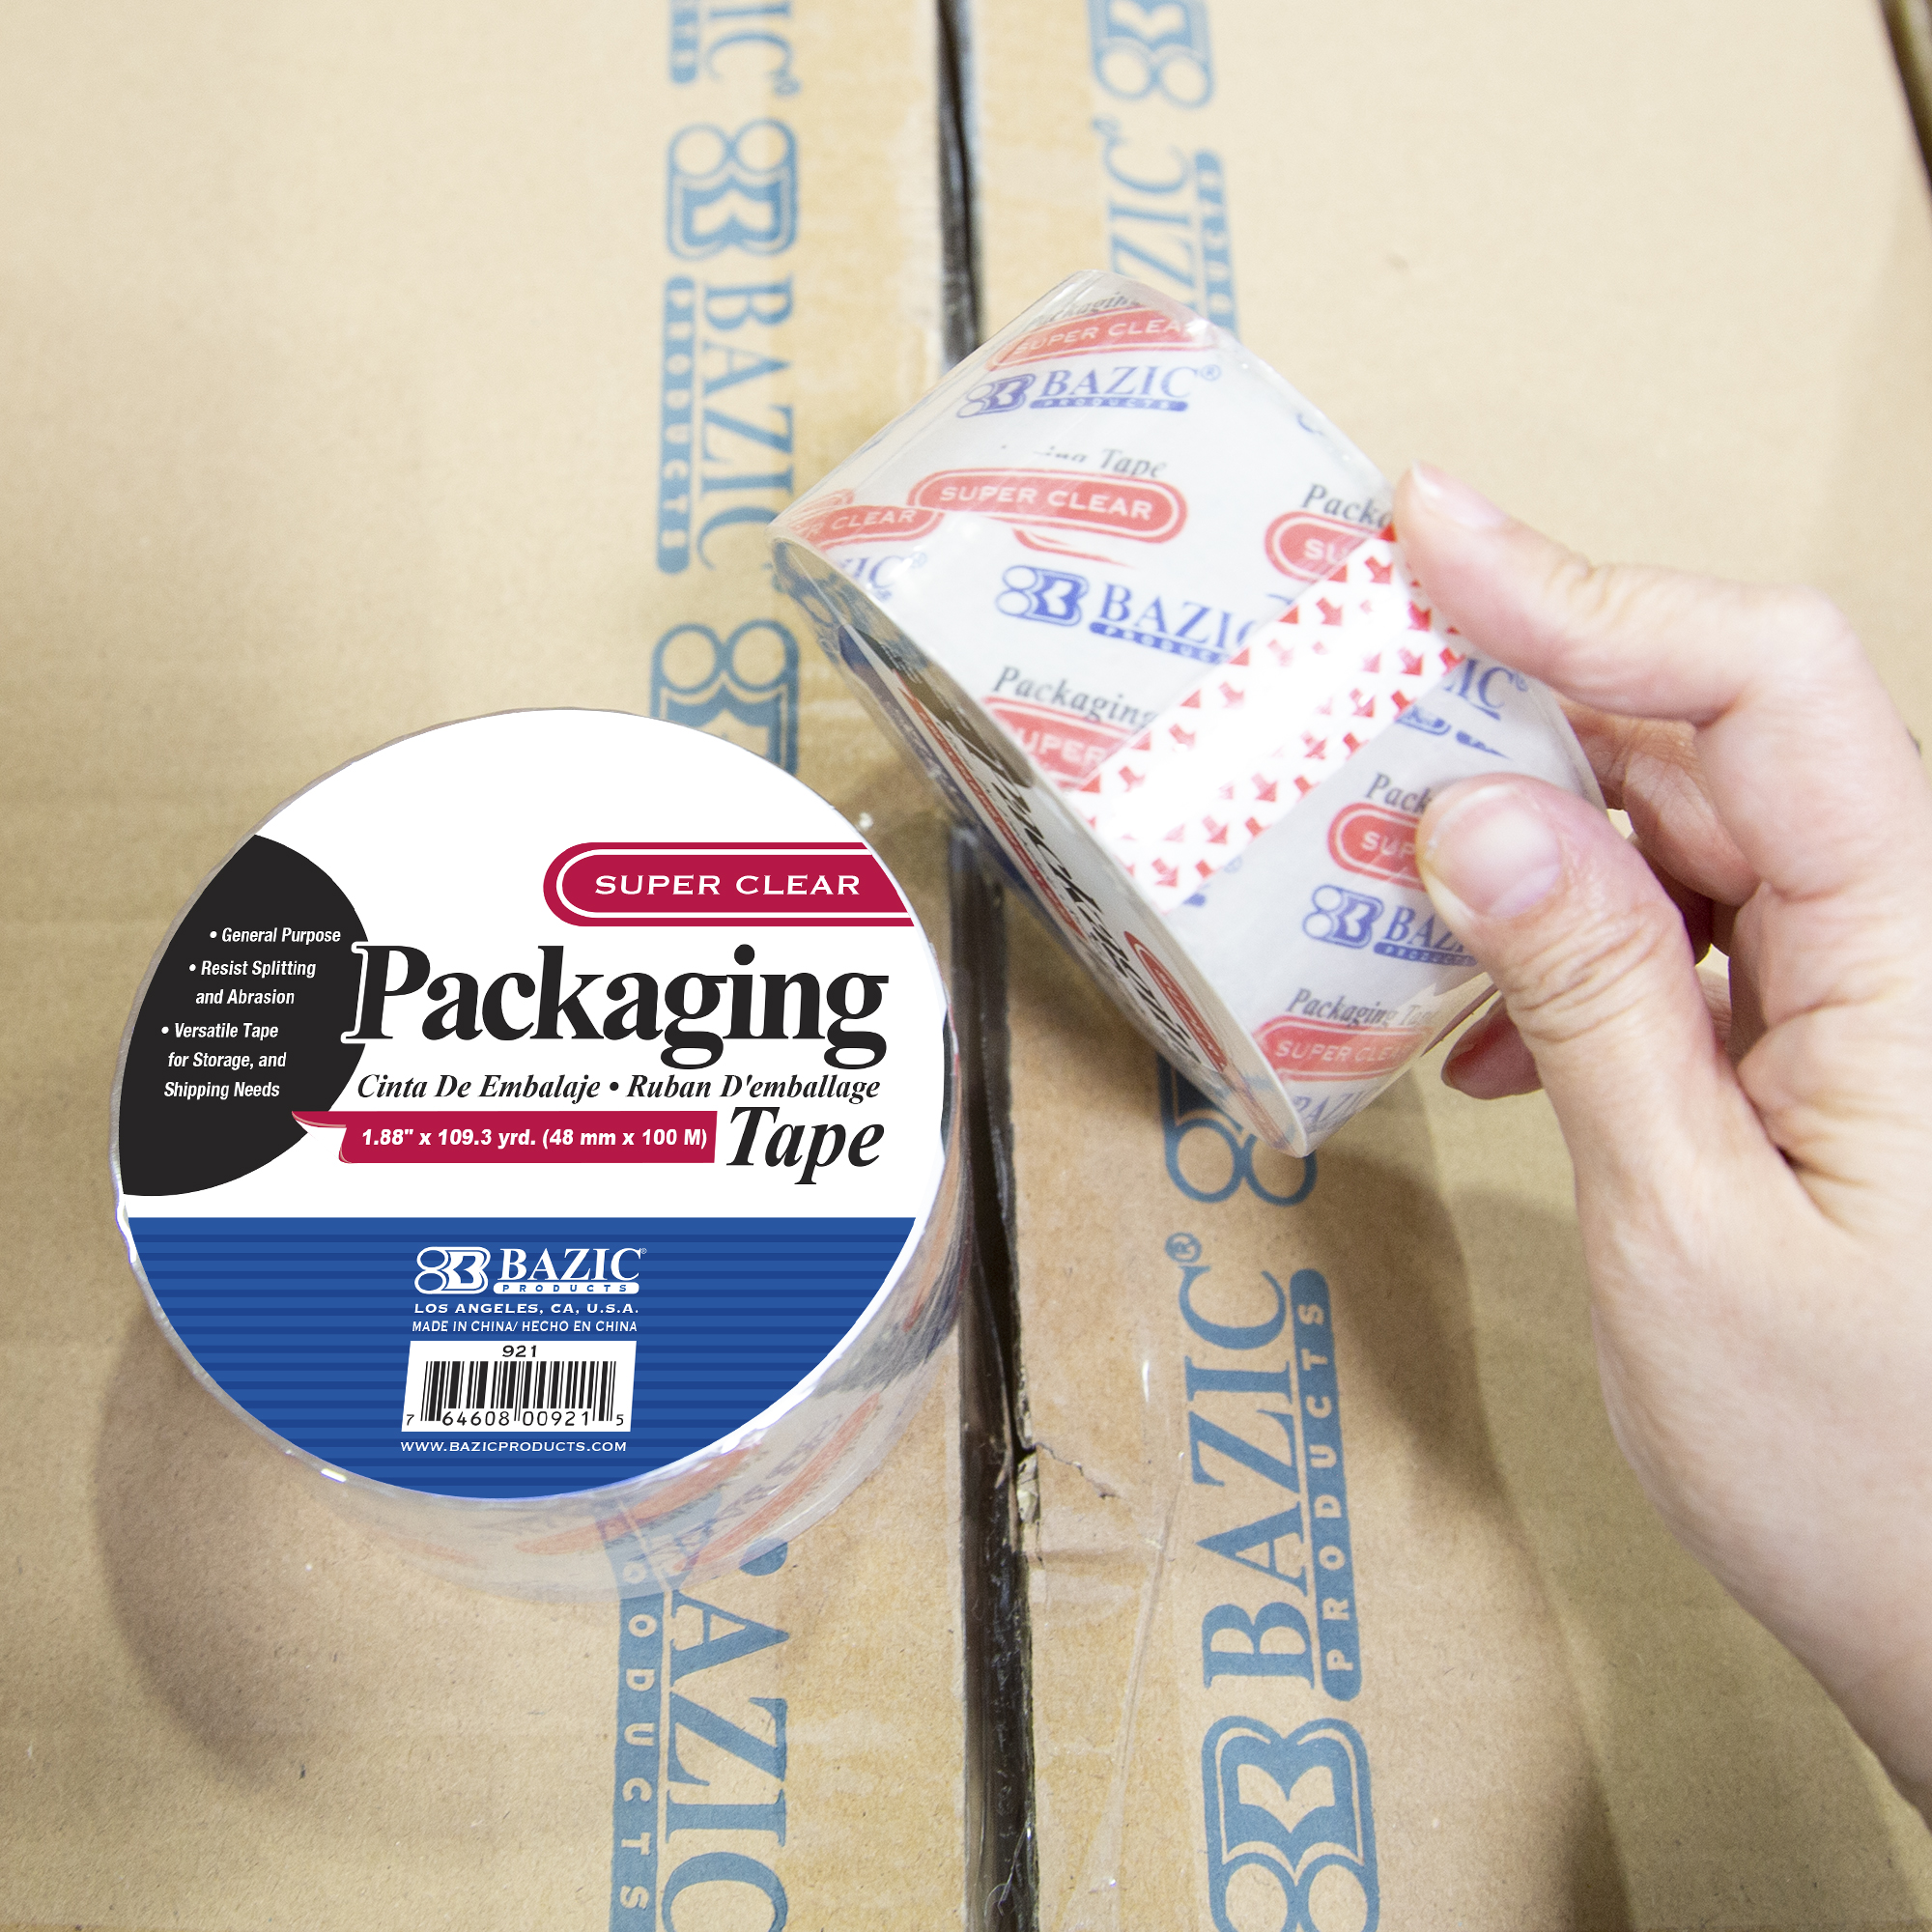 Bazic Heavy Duty Industrial Clear Packing Tape 1.88 x 109.3 Yards